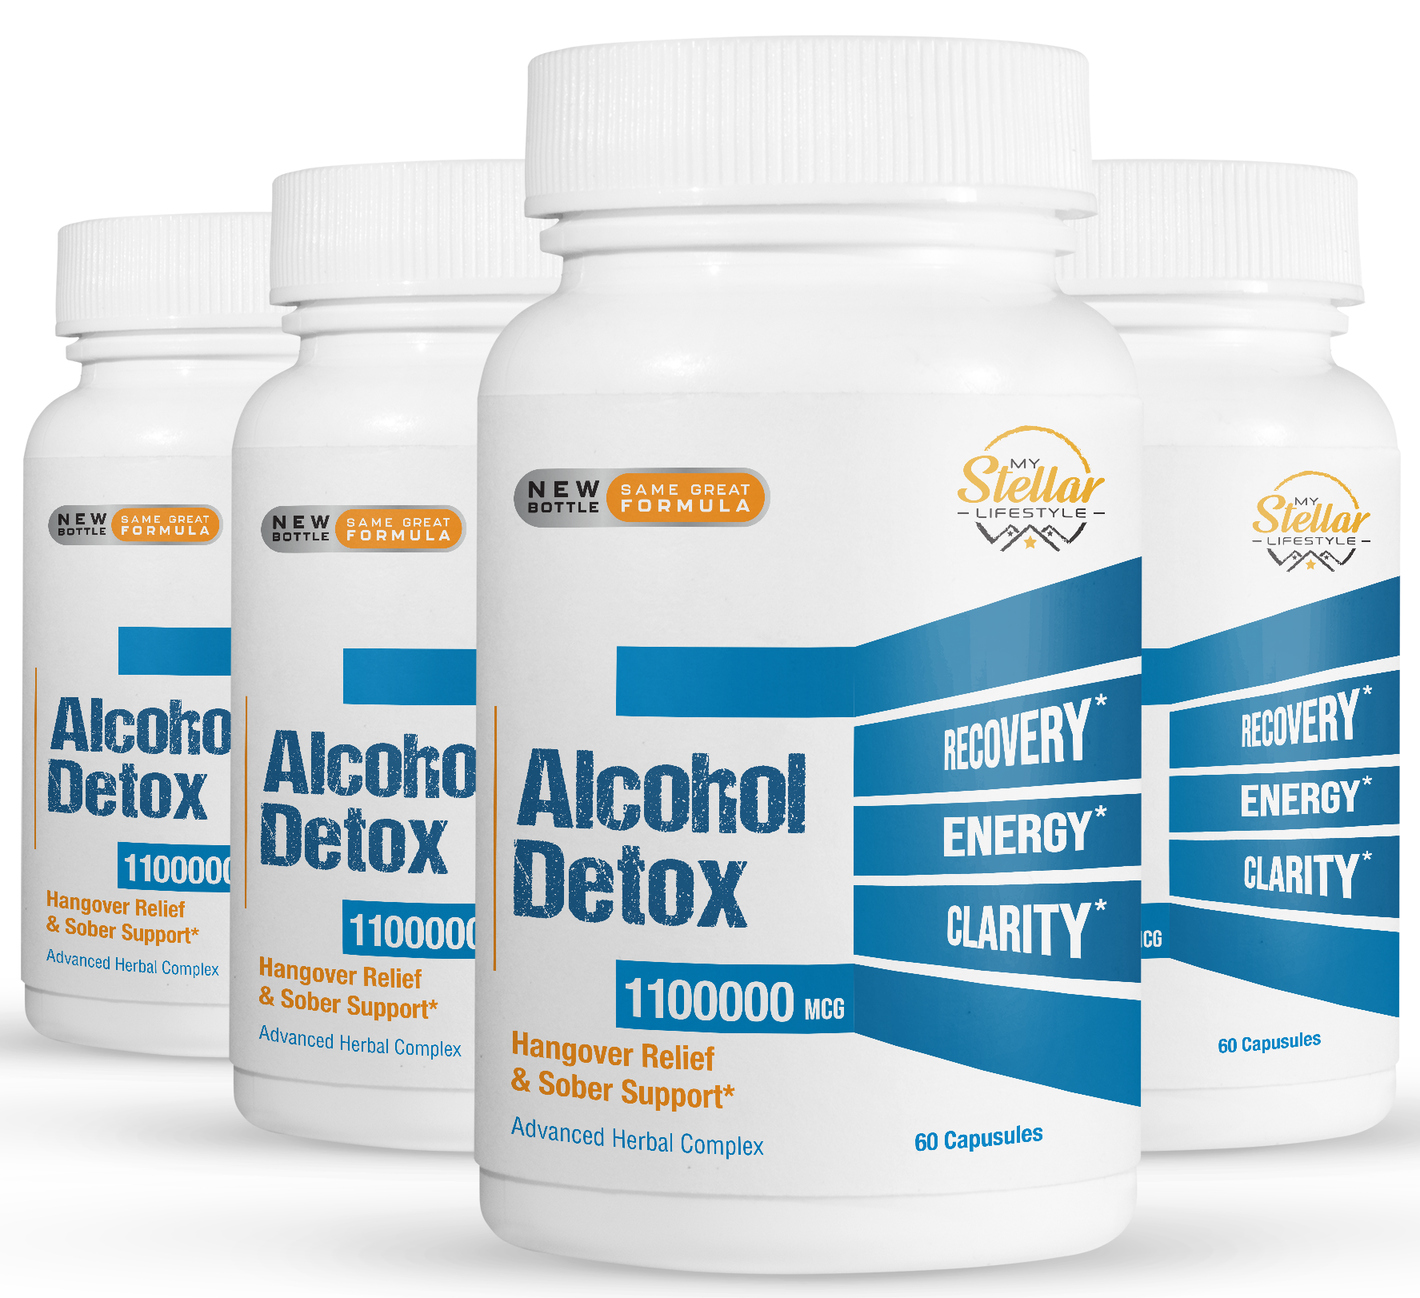 4 Pack Alcohol Detox, hangover relief and sober support-60 Capsules x4 - $126.71